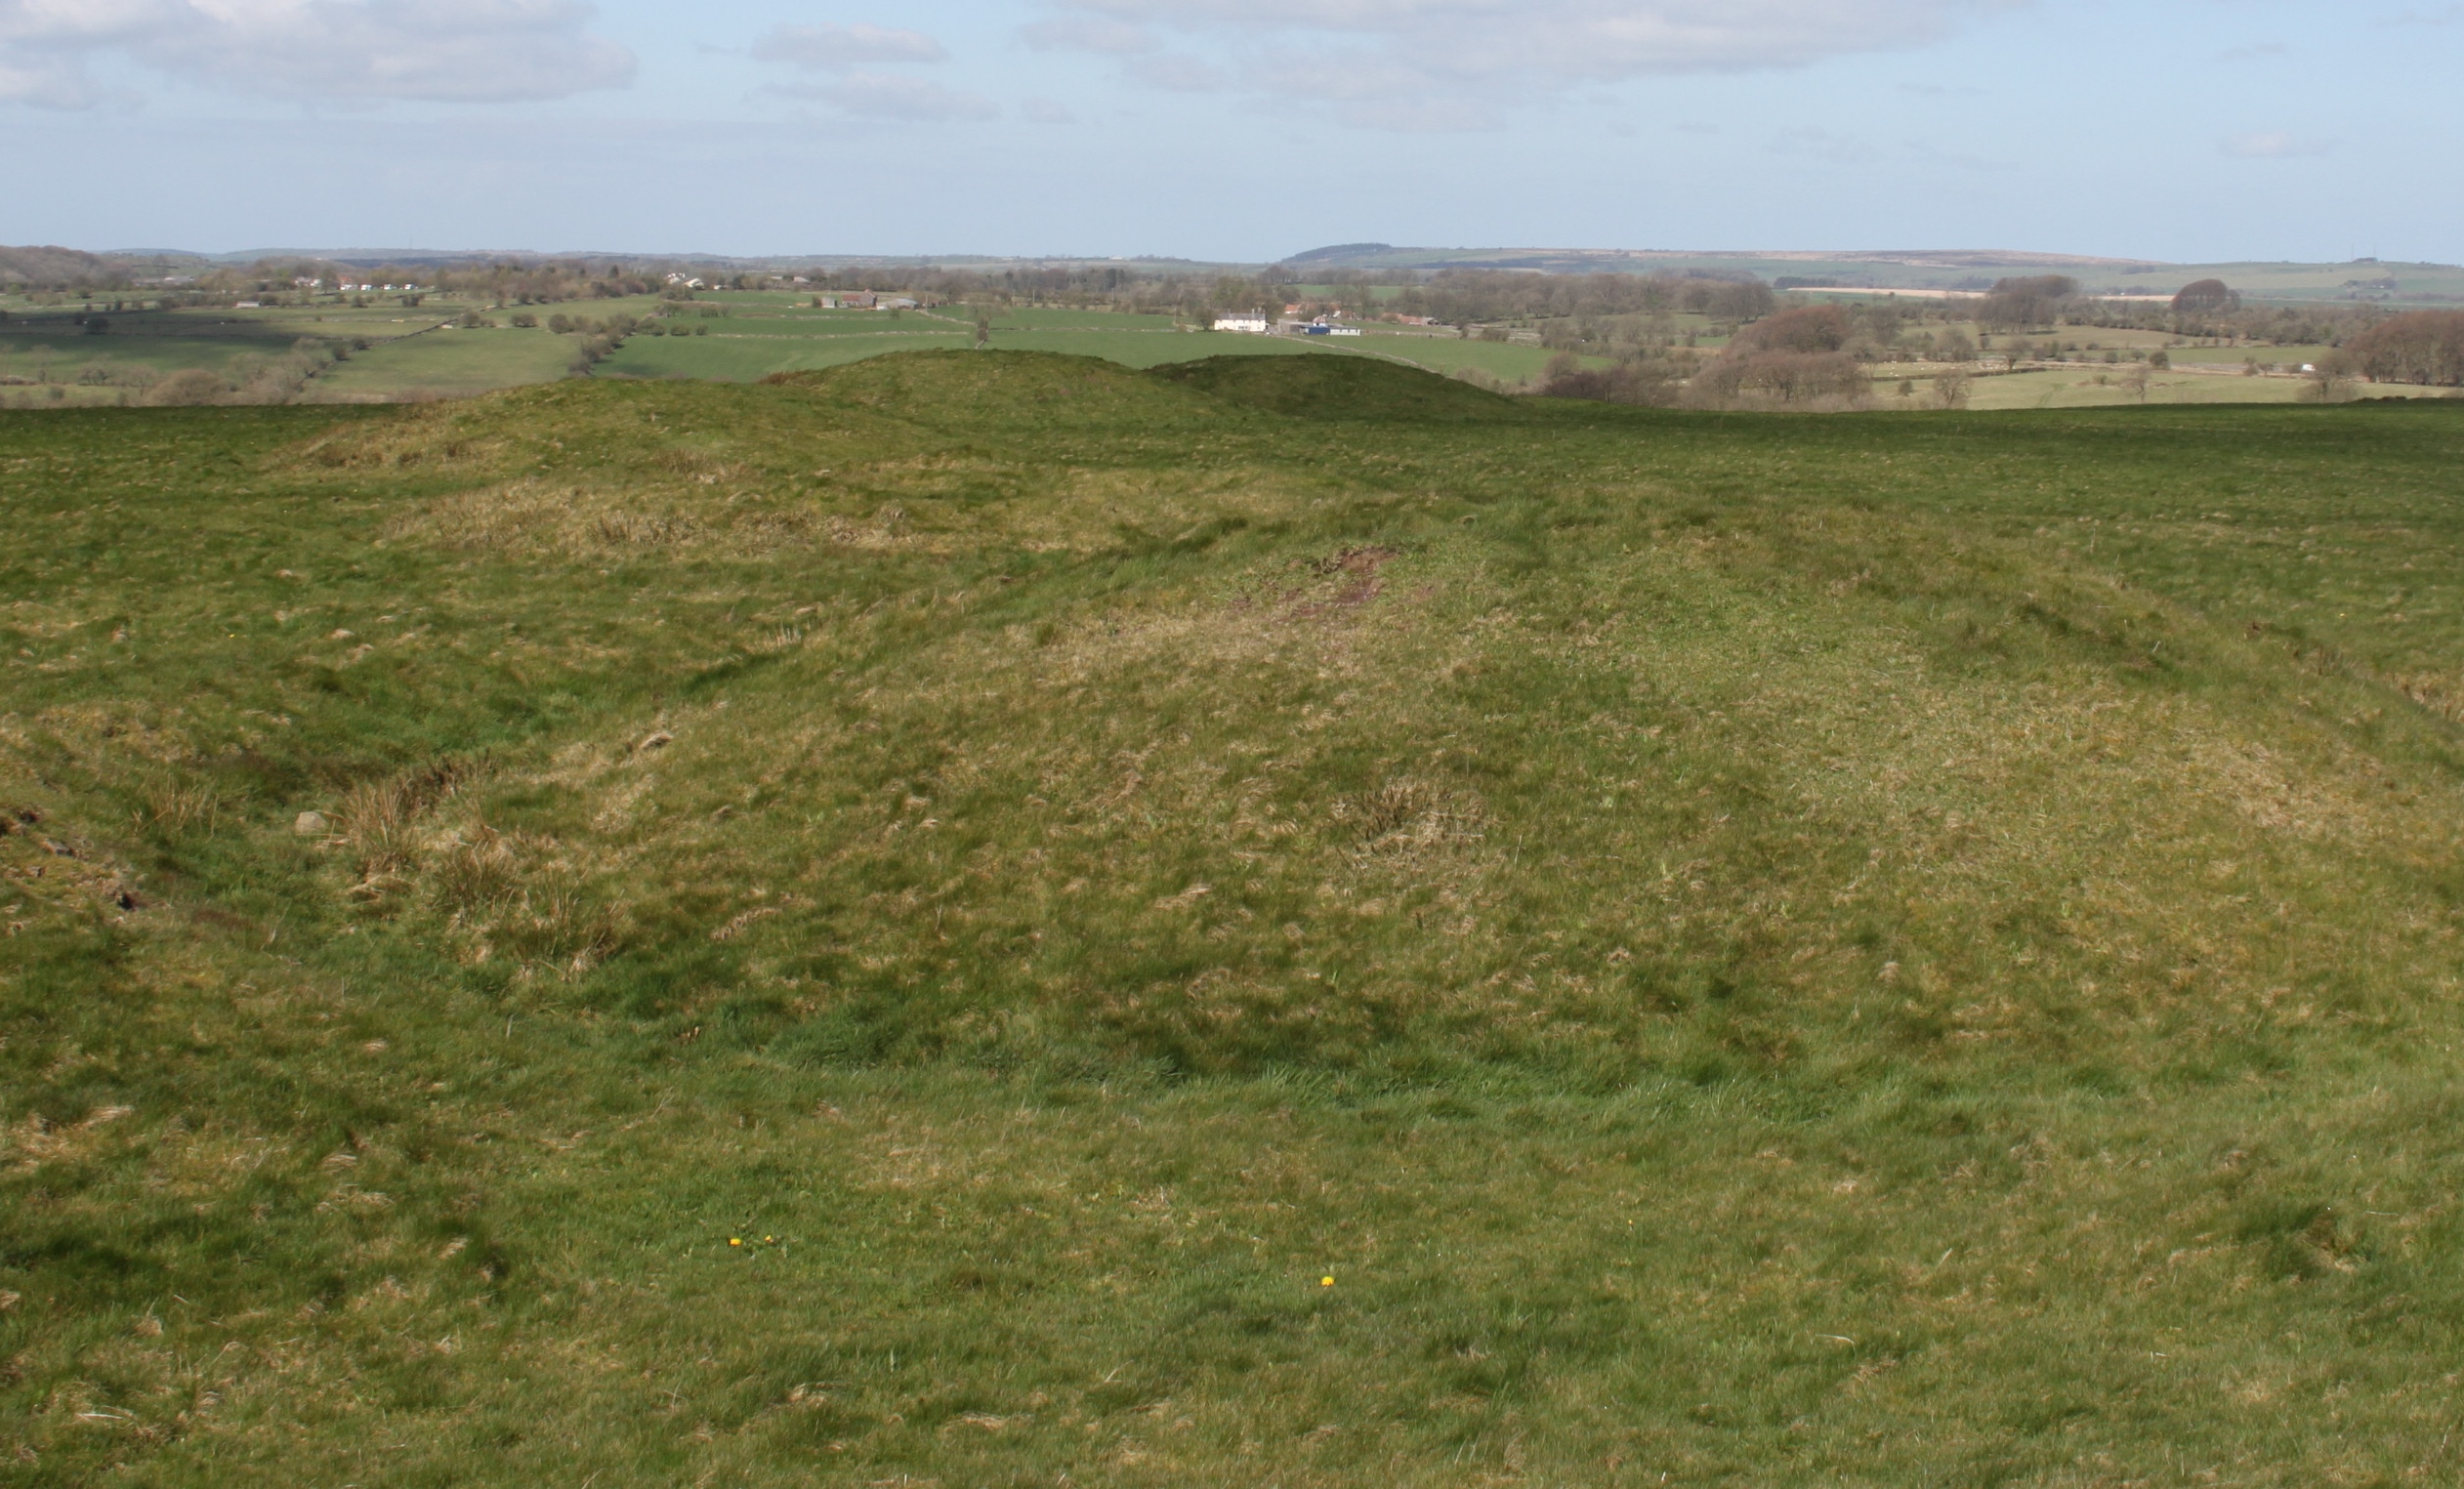 Priddy Nine Barrows and Ashen Hill Barrow Cemeteries